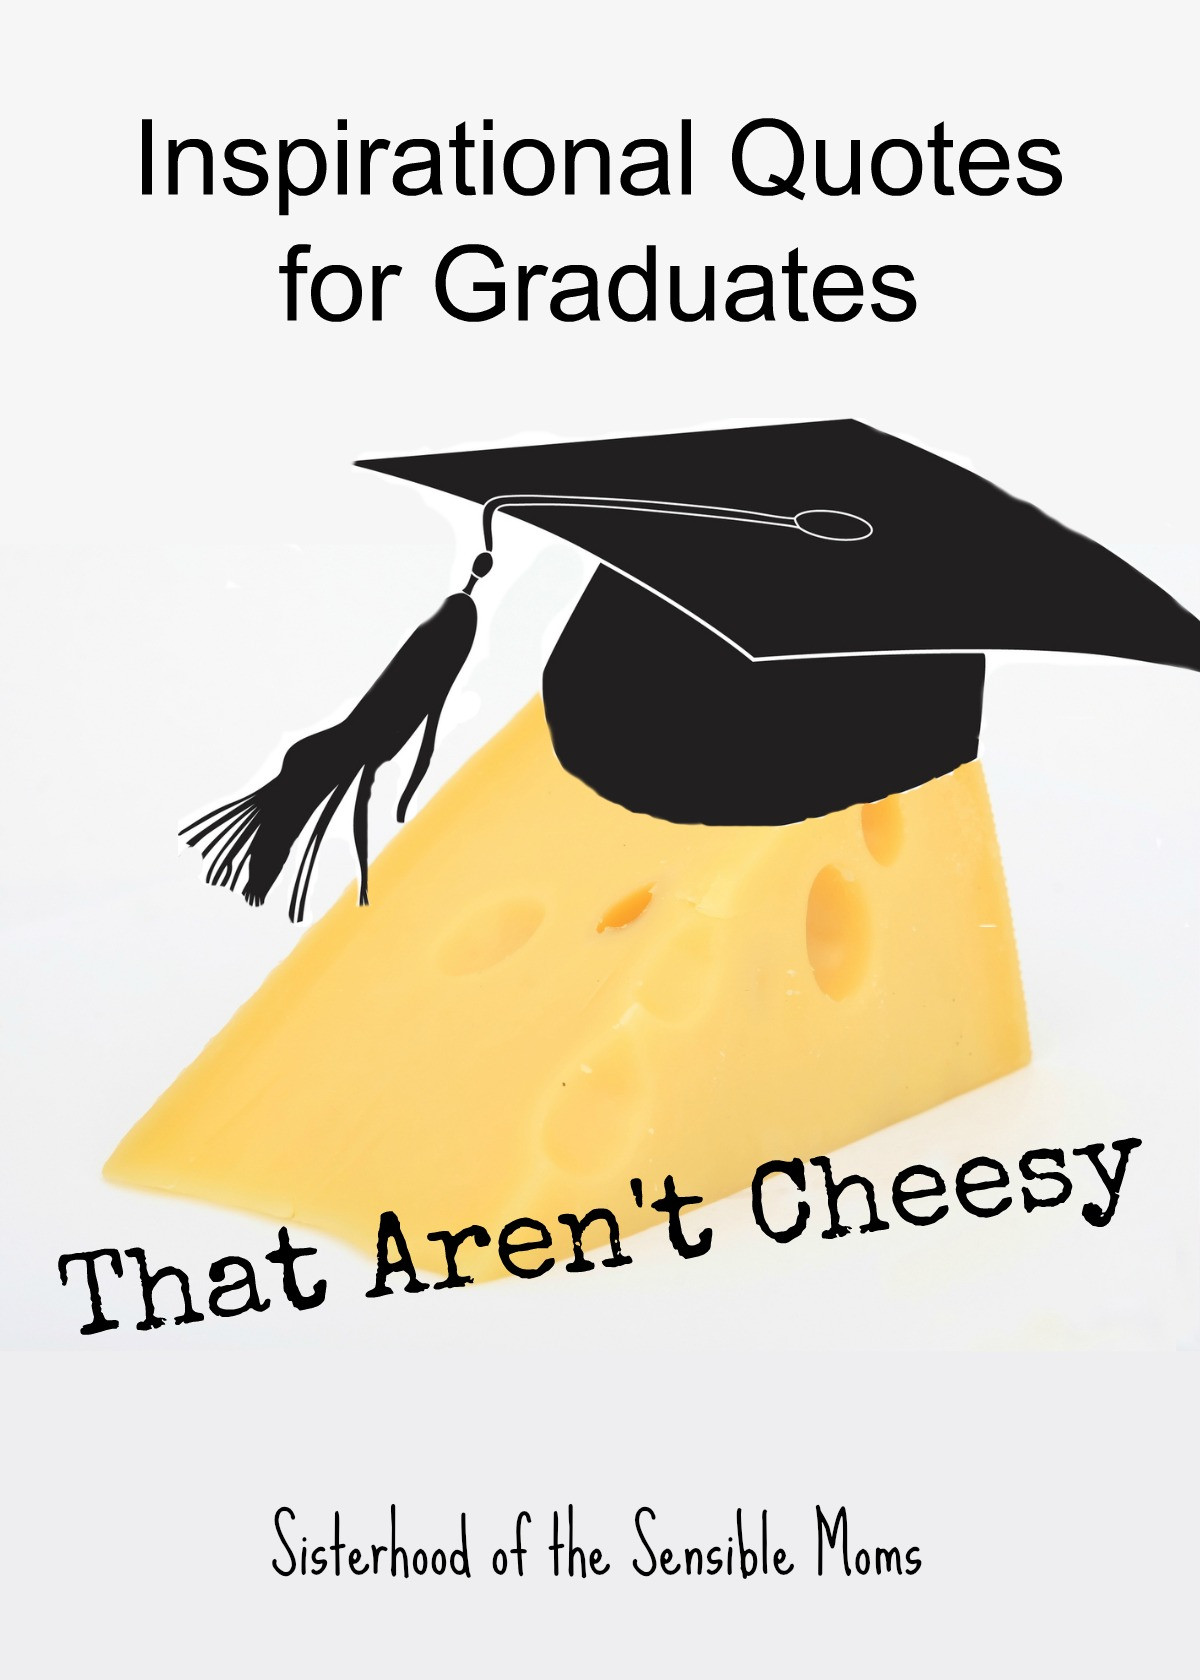 Inspirational Graduation Quotes
 Inspirational Quotes for Graduates That Aren t Cheesy